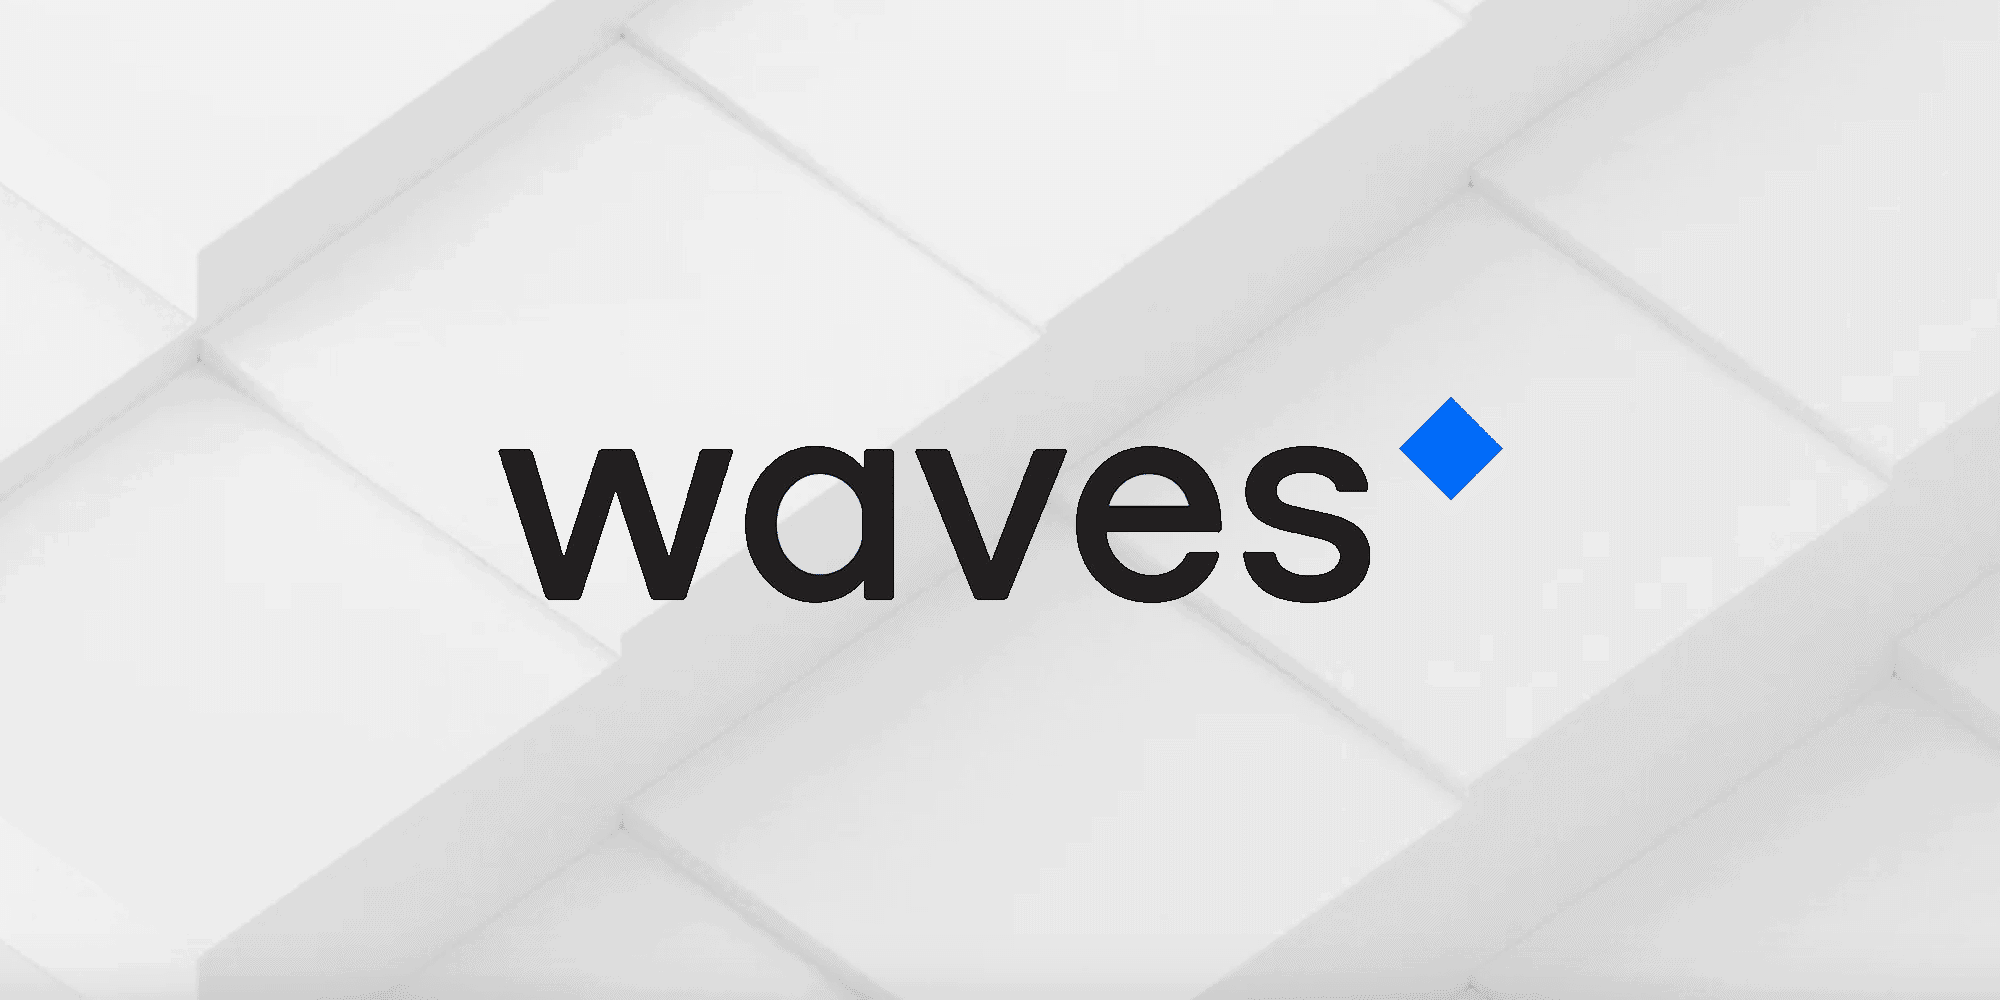 investing in waves